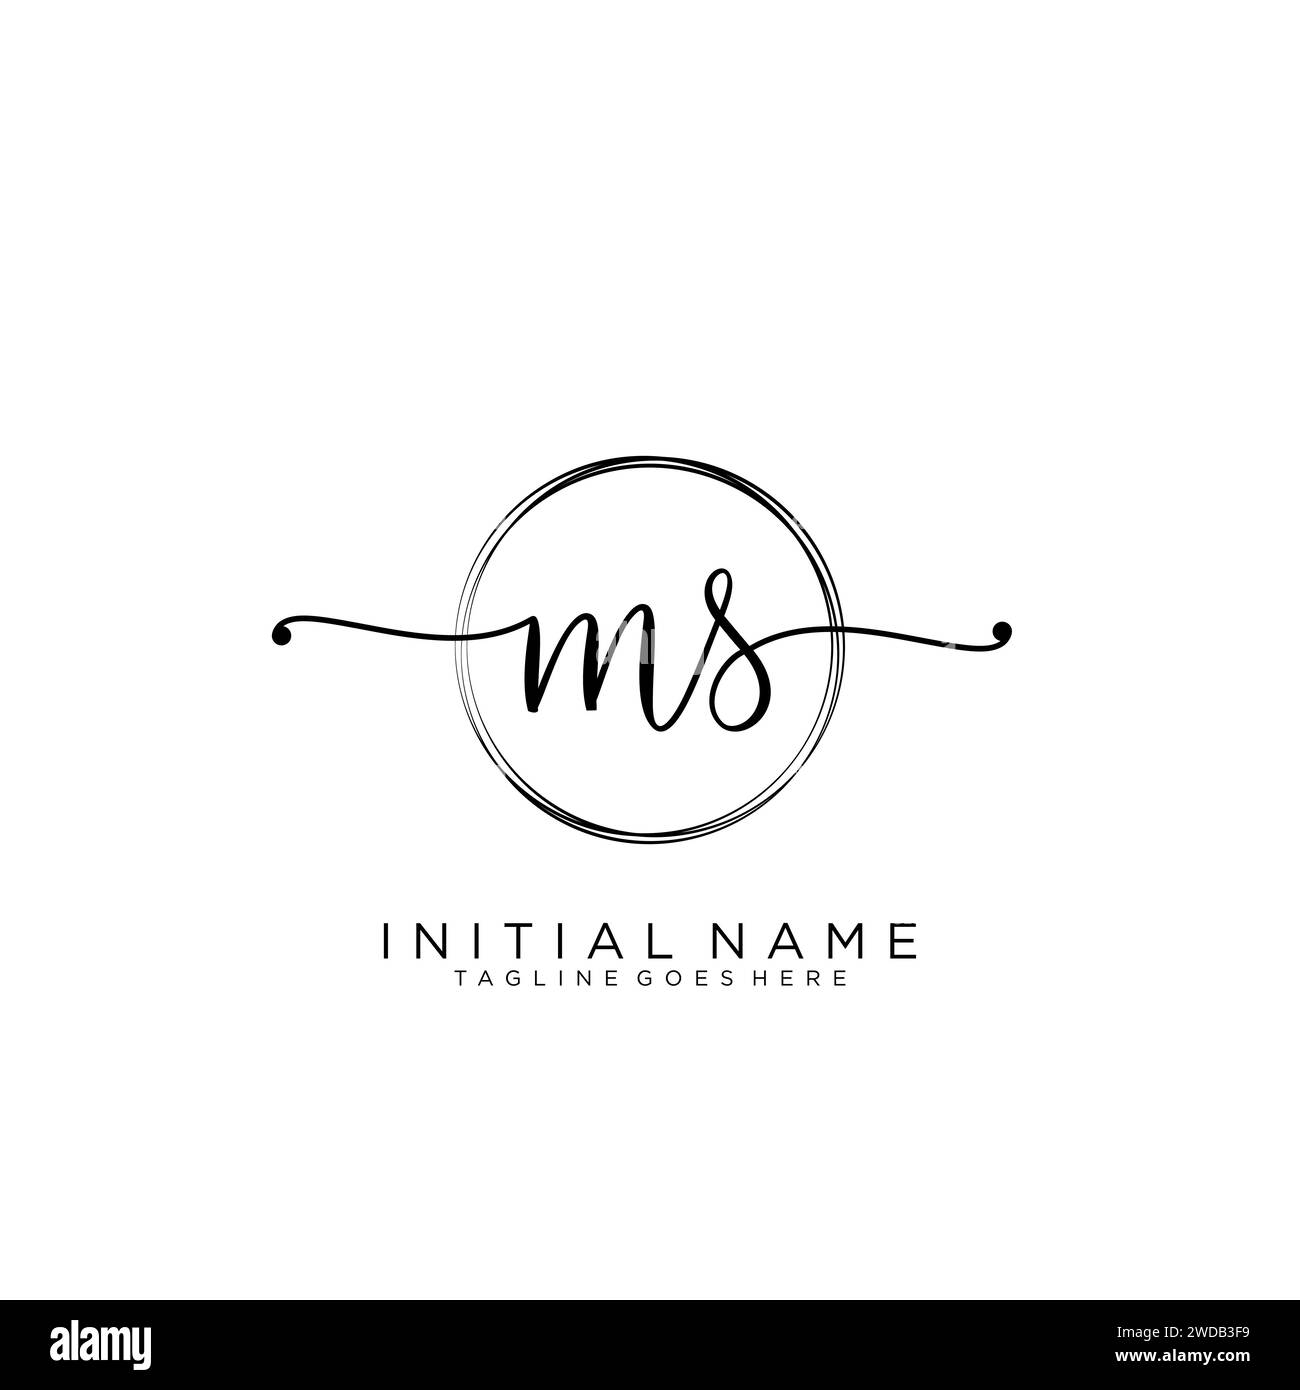 MS Initial handwriting logo with circle Stock Vector